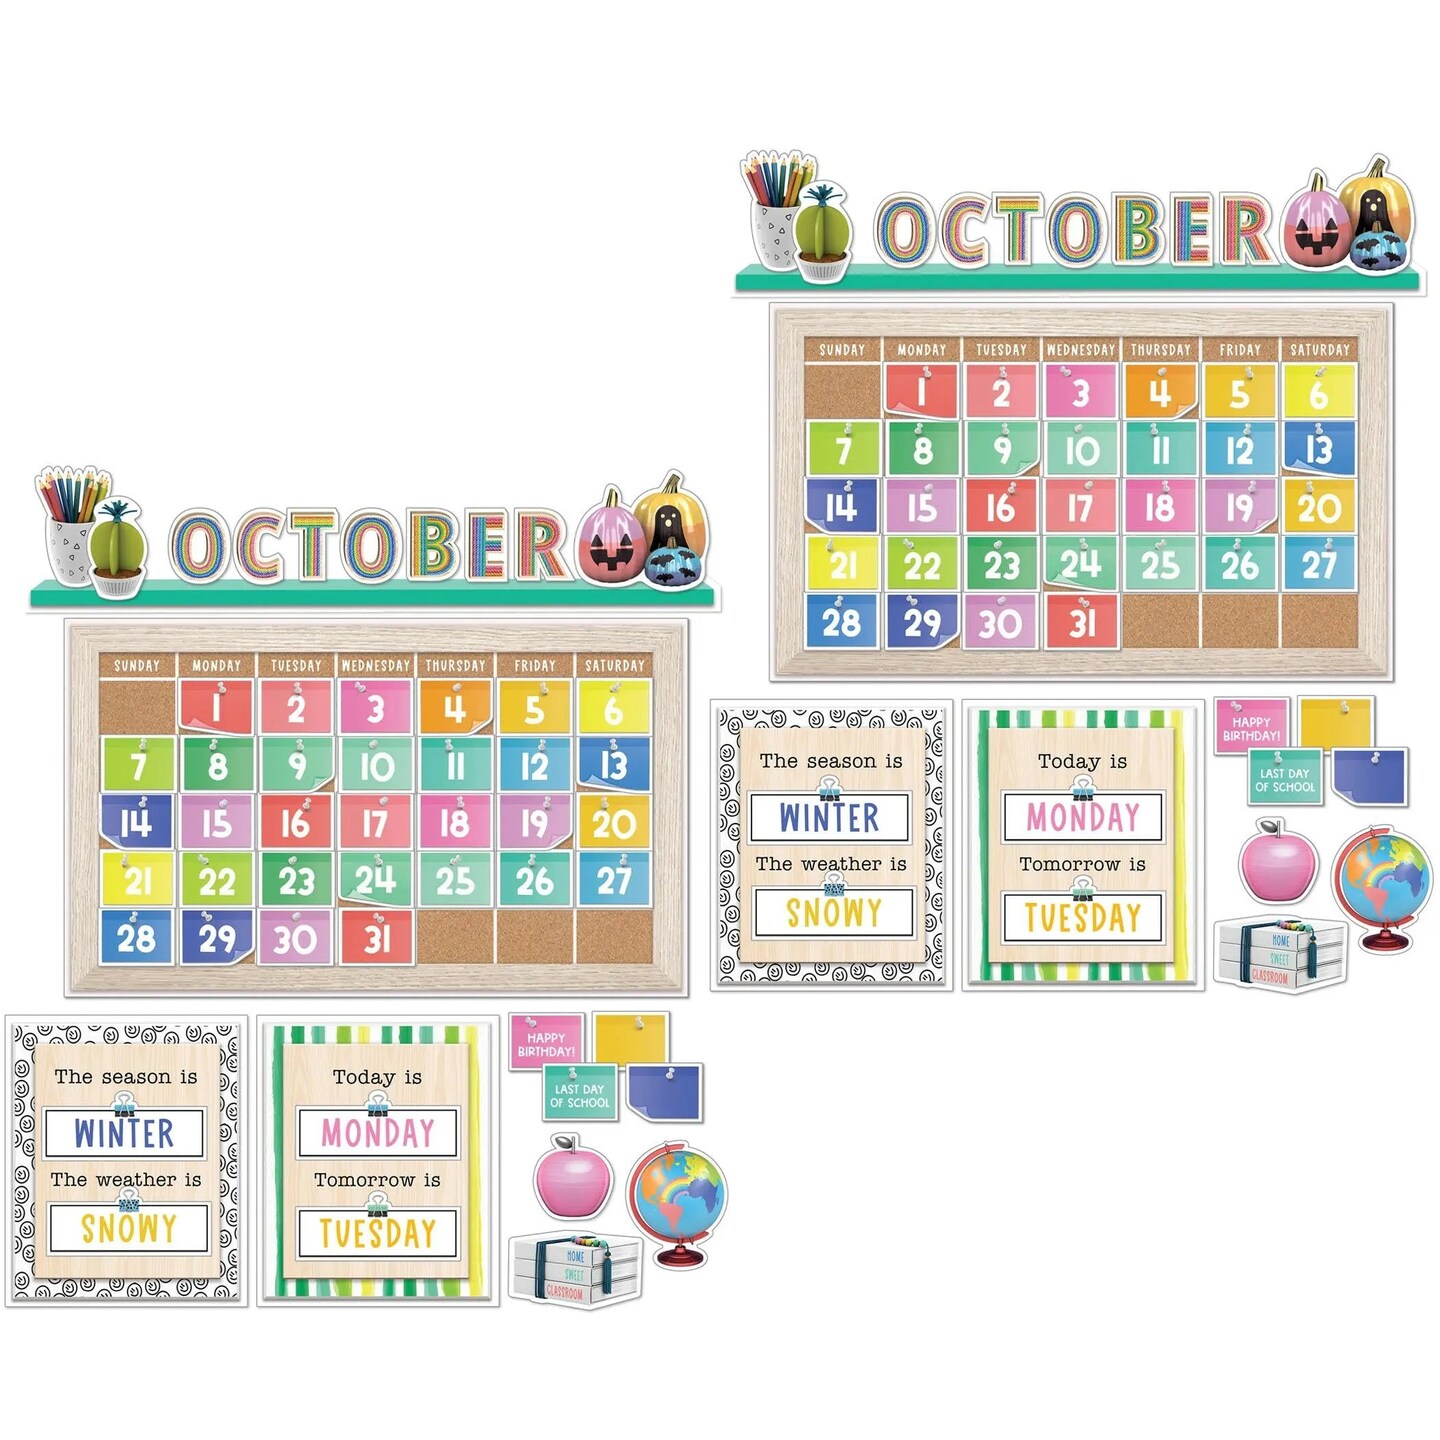 (2 St) Creatively Inspired Calendar Bb Set | Child Friendly Calendar | Colorful and Eye Catching Design